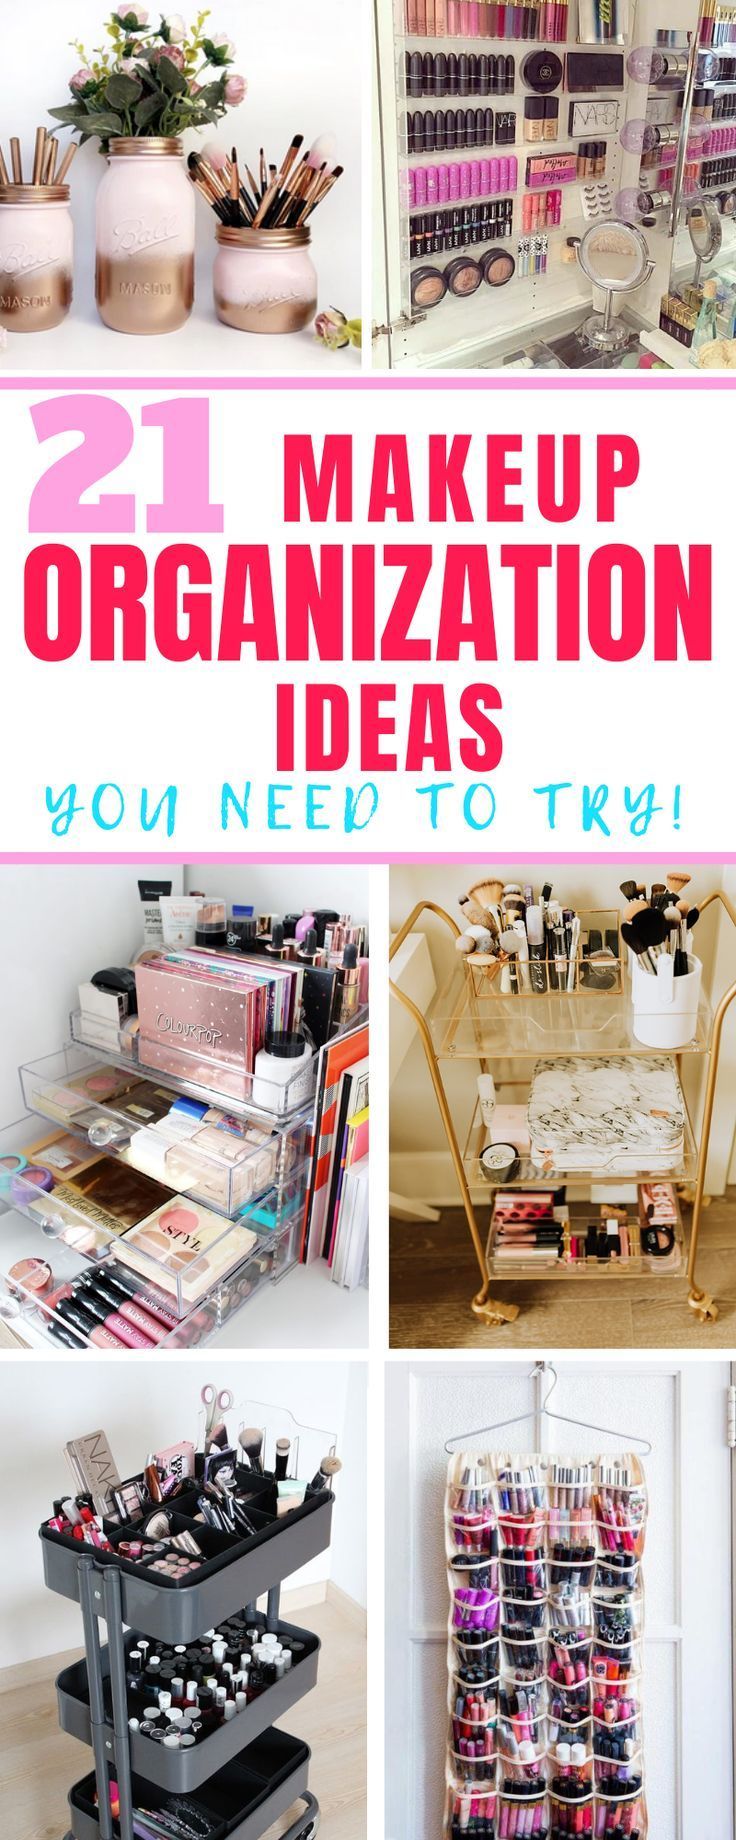 21 Creative Makeup Organization Ideas to Declutter Your Space -   18 diy Room organizers ideas